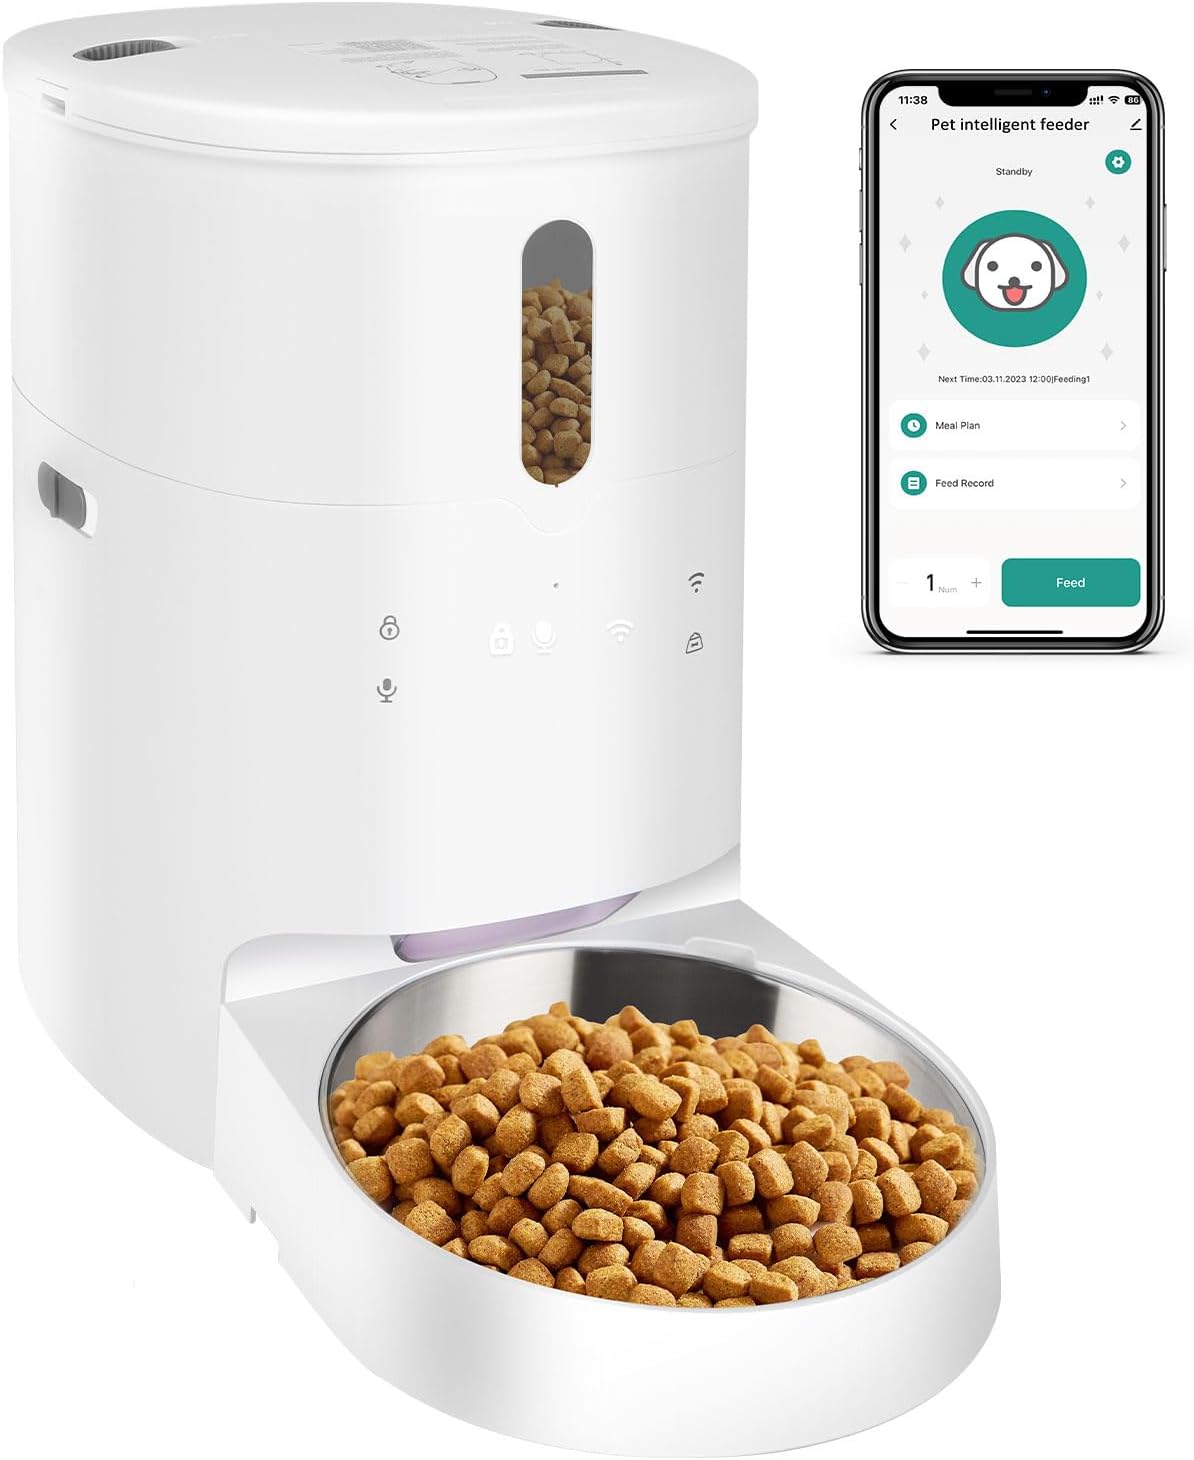 Automatic Cat Feeder, Automatic Cat Food Dispenser with Customizable Feeding Schedule, Smart Dog Feeder, Timed WiFi Cat Feeder with Interactive Voice Recorder, Automatic Pet Feeder for Dogs and Cats